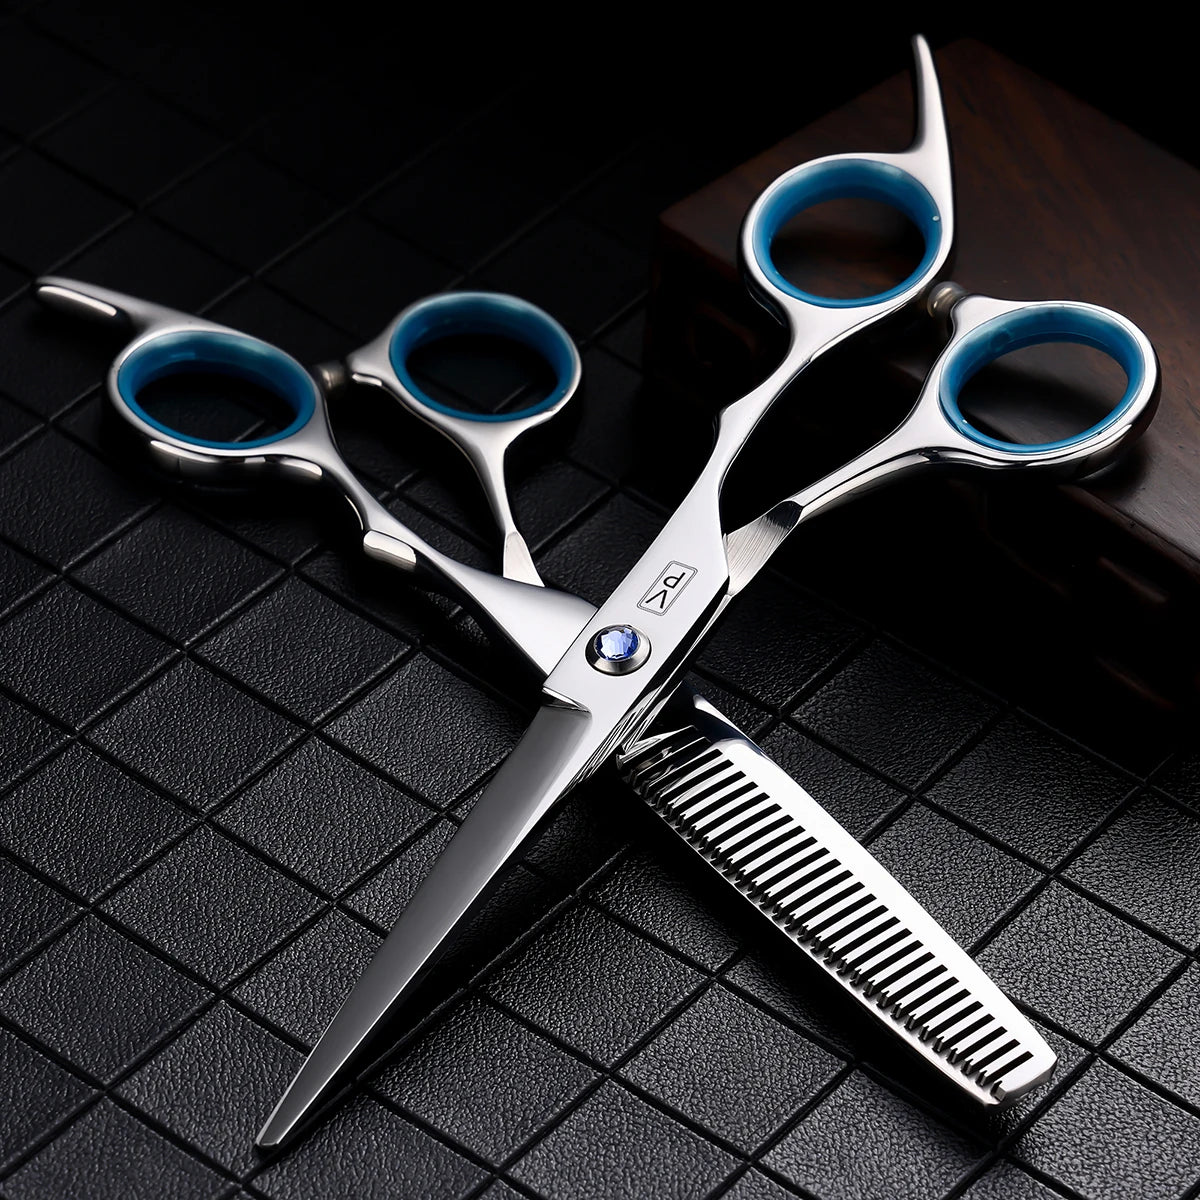 KD Haircut Scissors 6 Inch Barber Shop Hairdresser's Cutting Thinning Tools